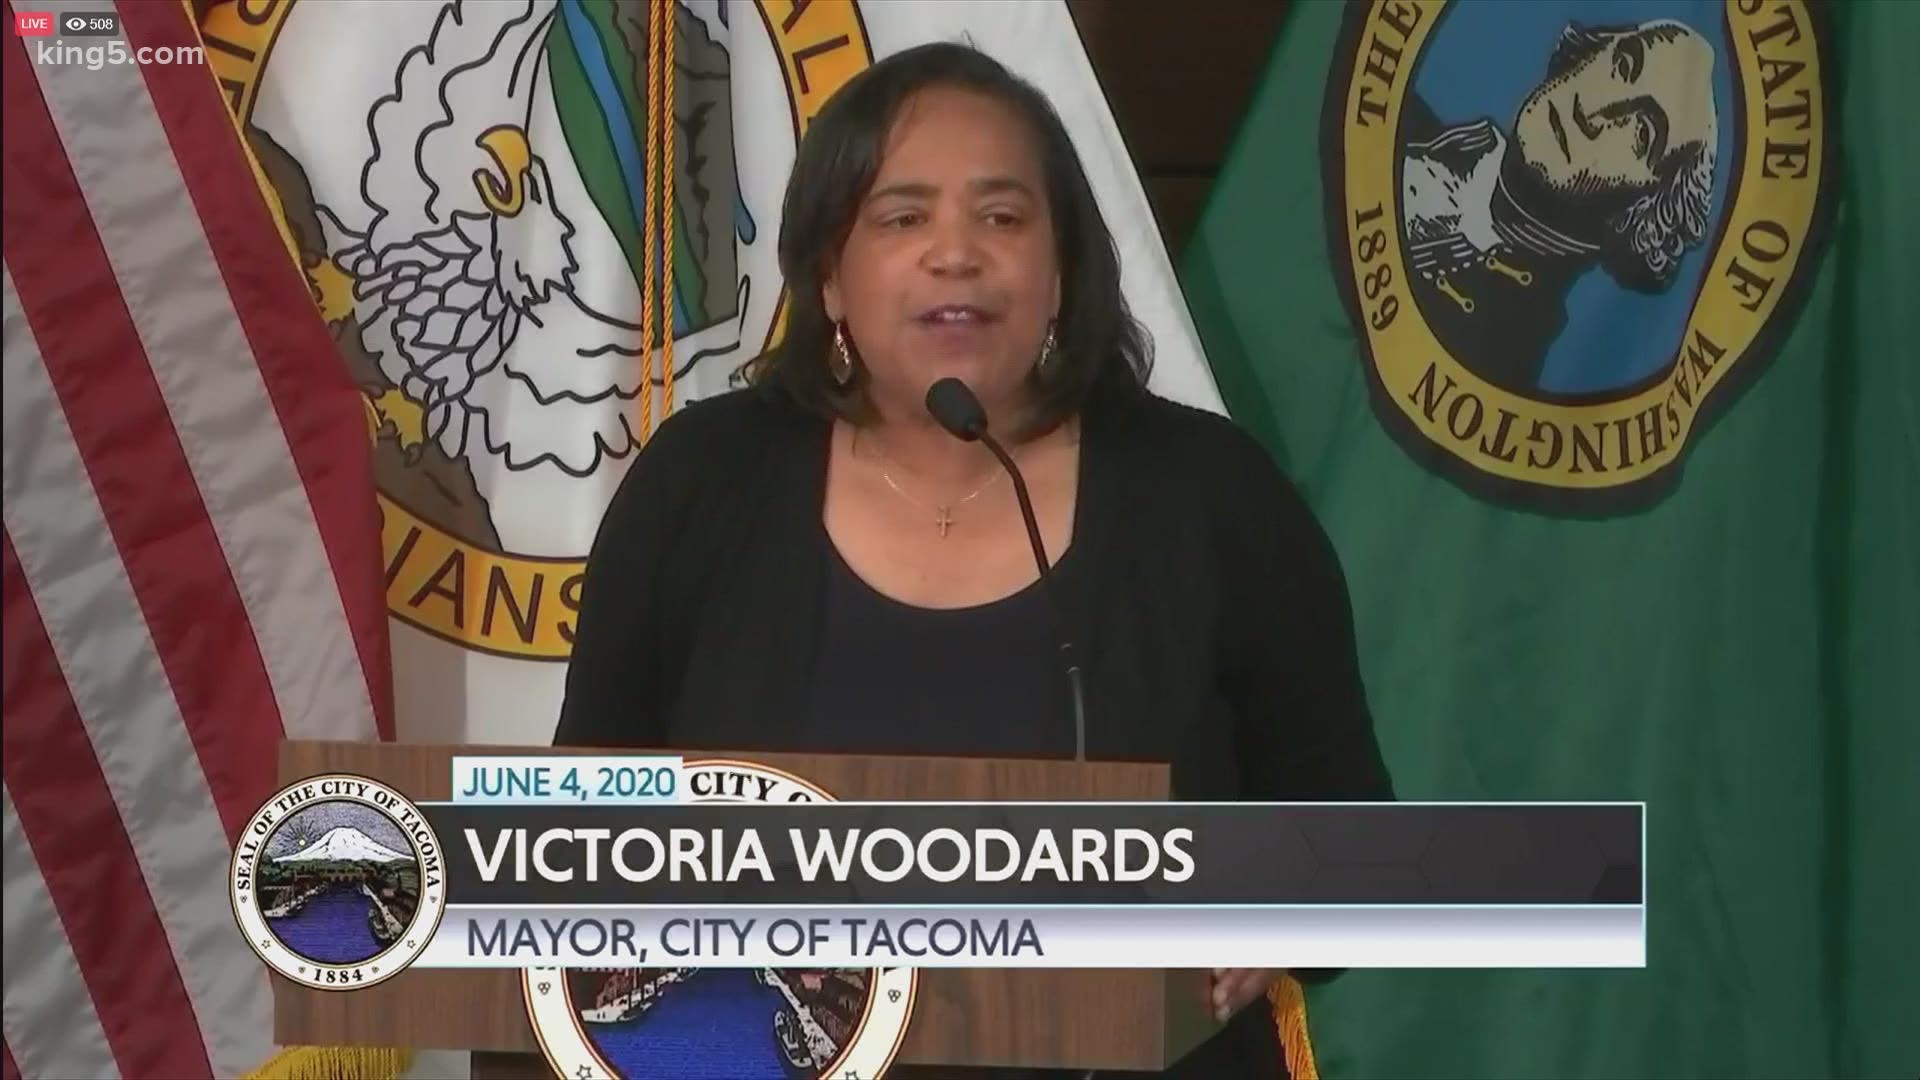 "We waited way too long, and we have heard too many excuses," Tacoma Mayor Victoria Woodards said. Woodards announced several changes, including body cams for police